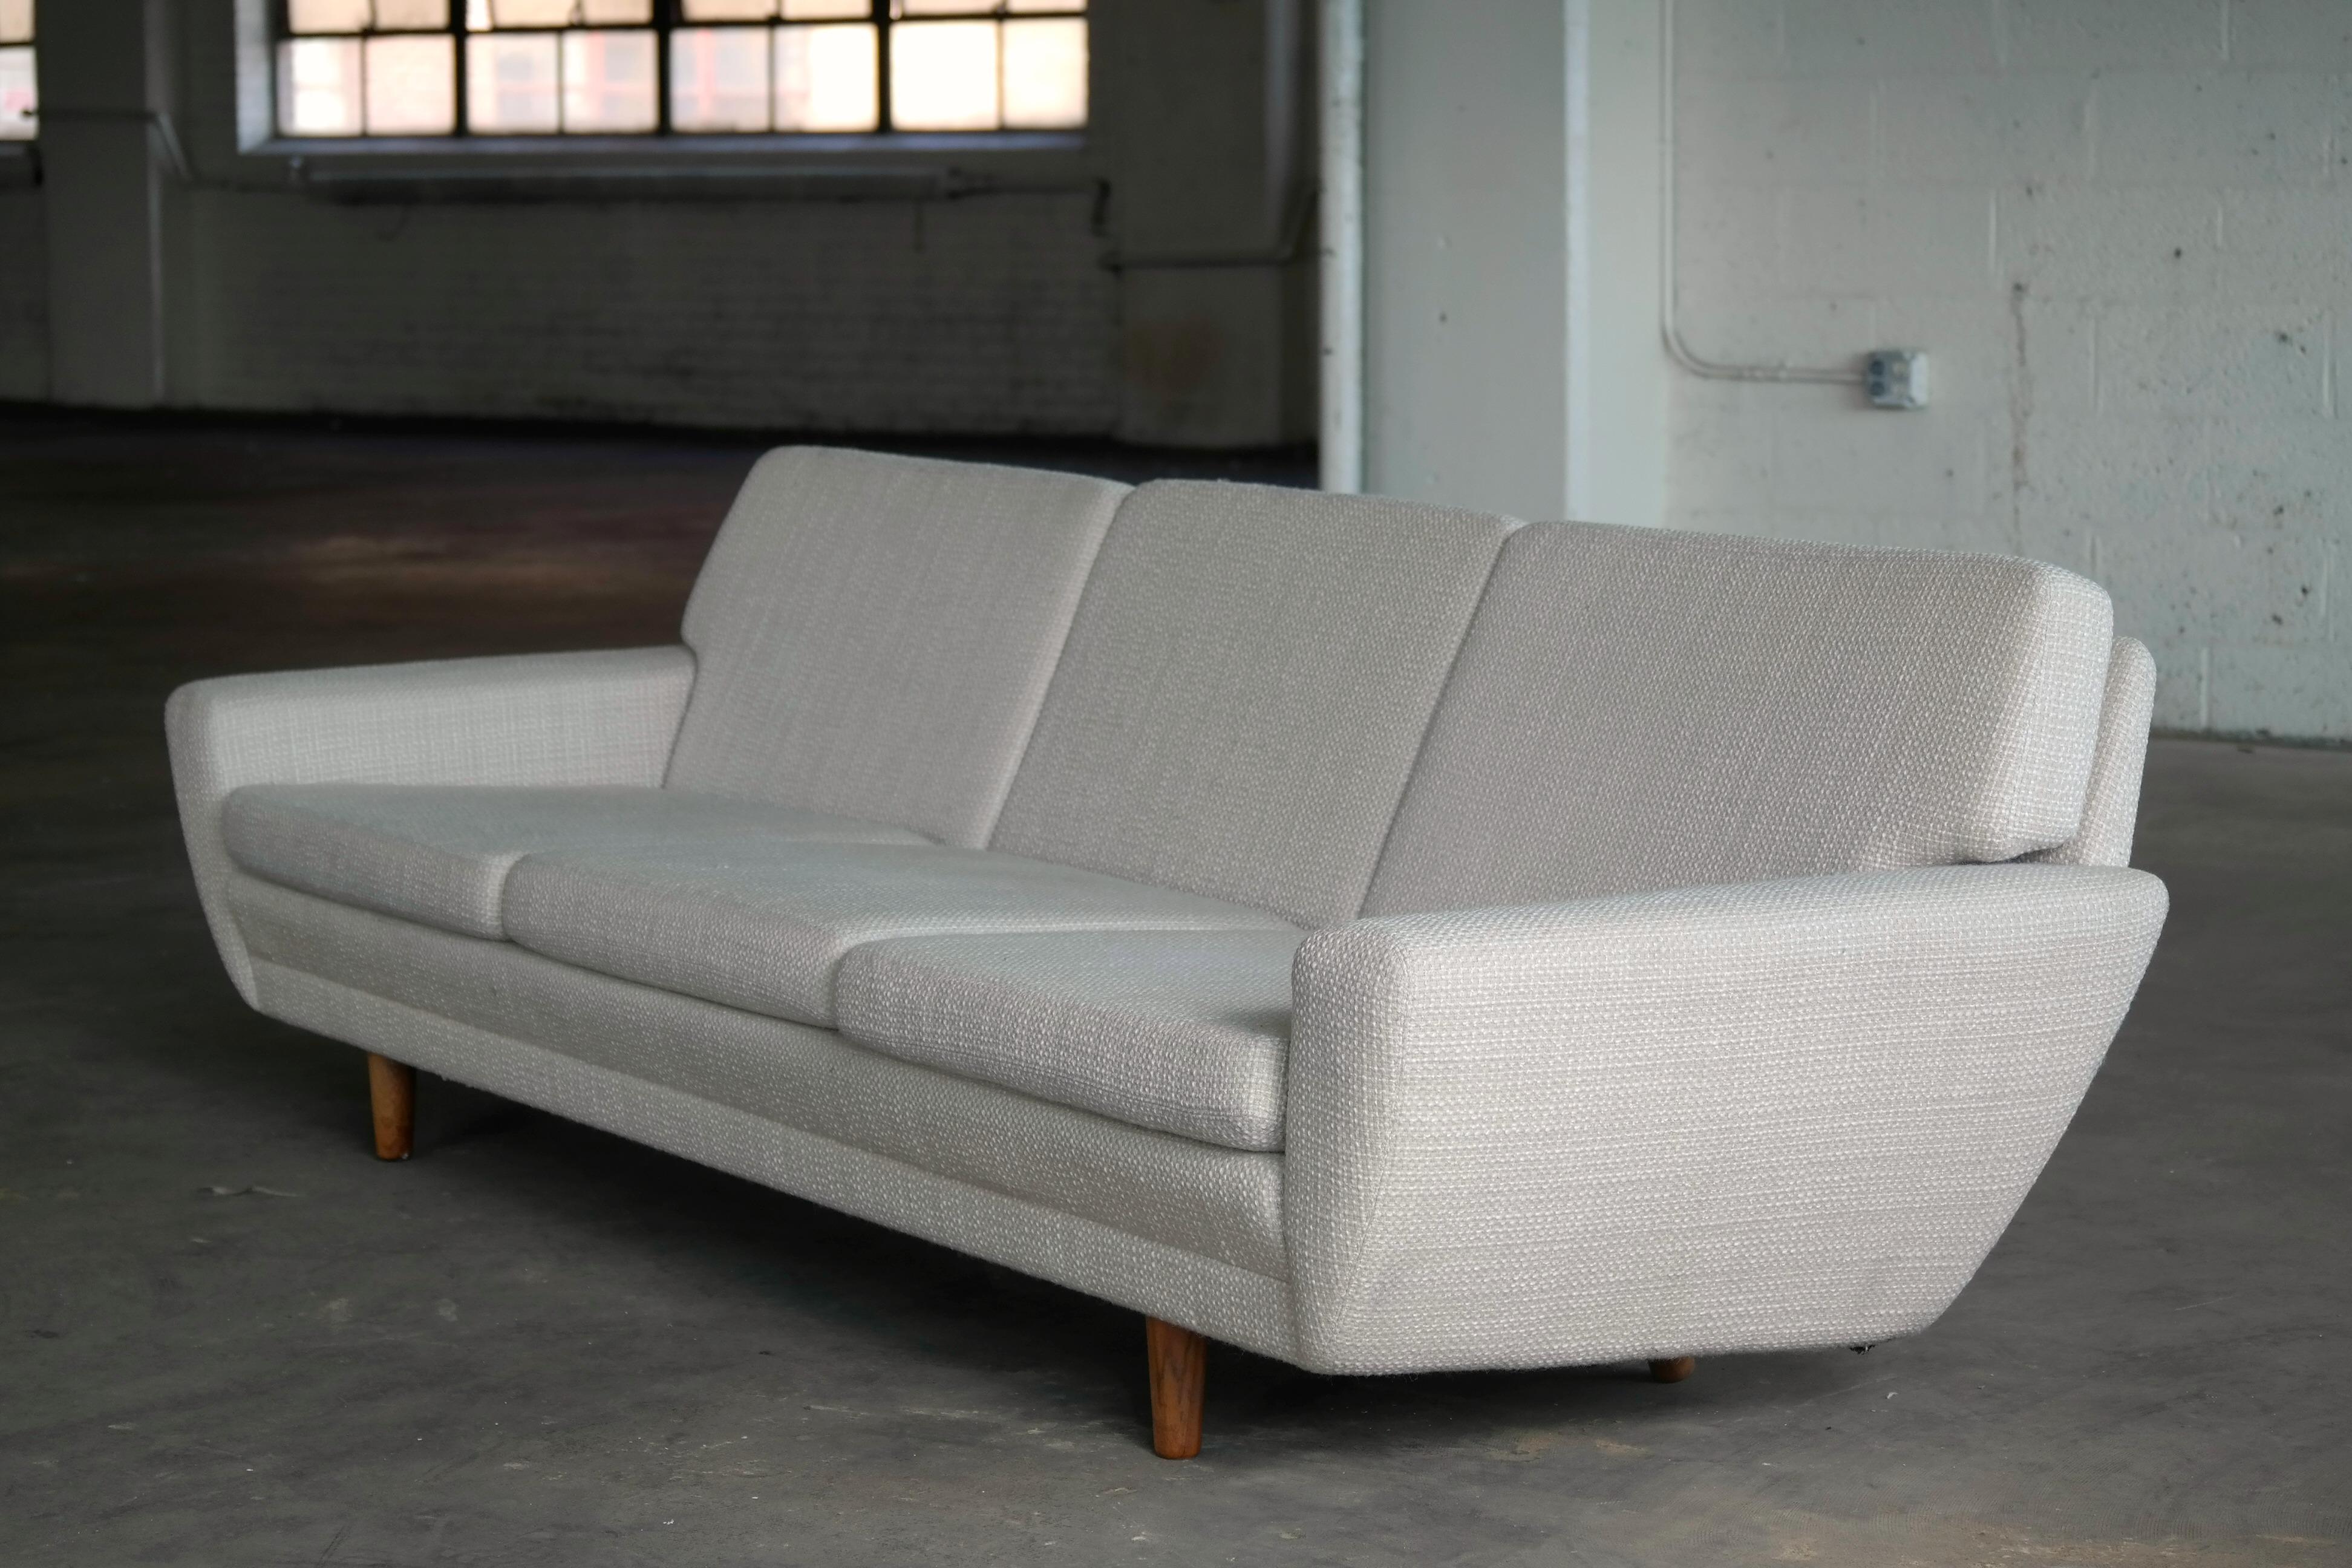 Beautiful large sofa Designed by Danish Designer, Georg Thams in 1968 as part of sofa group model 79 made by Vejen Polstermøbelfabrik for high-end Danish retailer, Domus Danica. While a beautiful very elegant design the sofa also have a nice